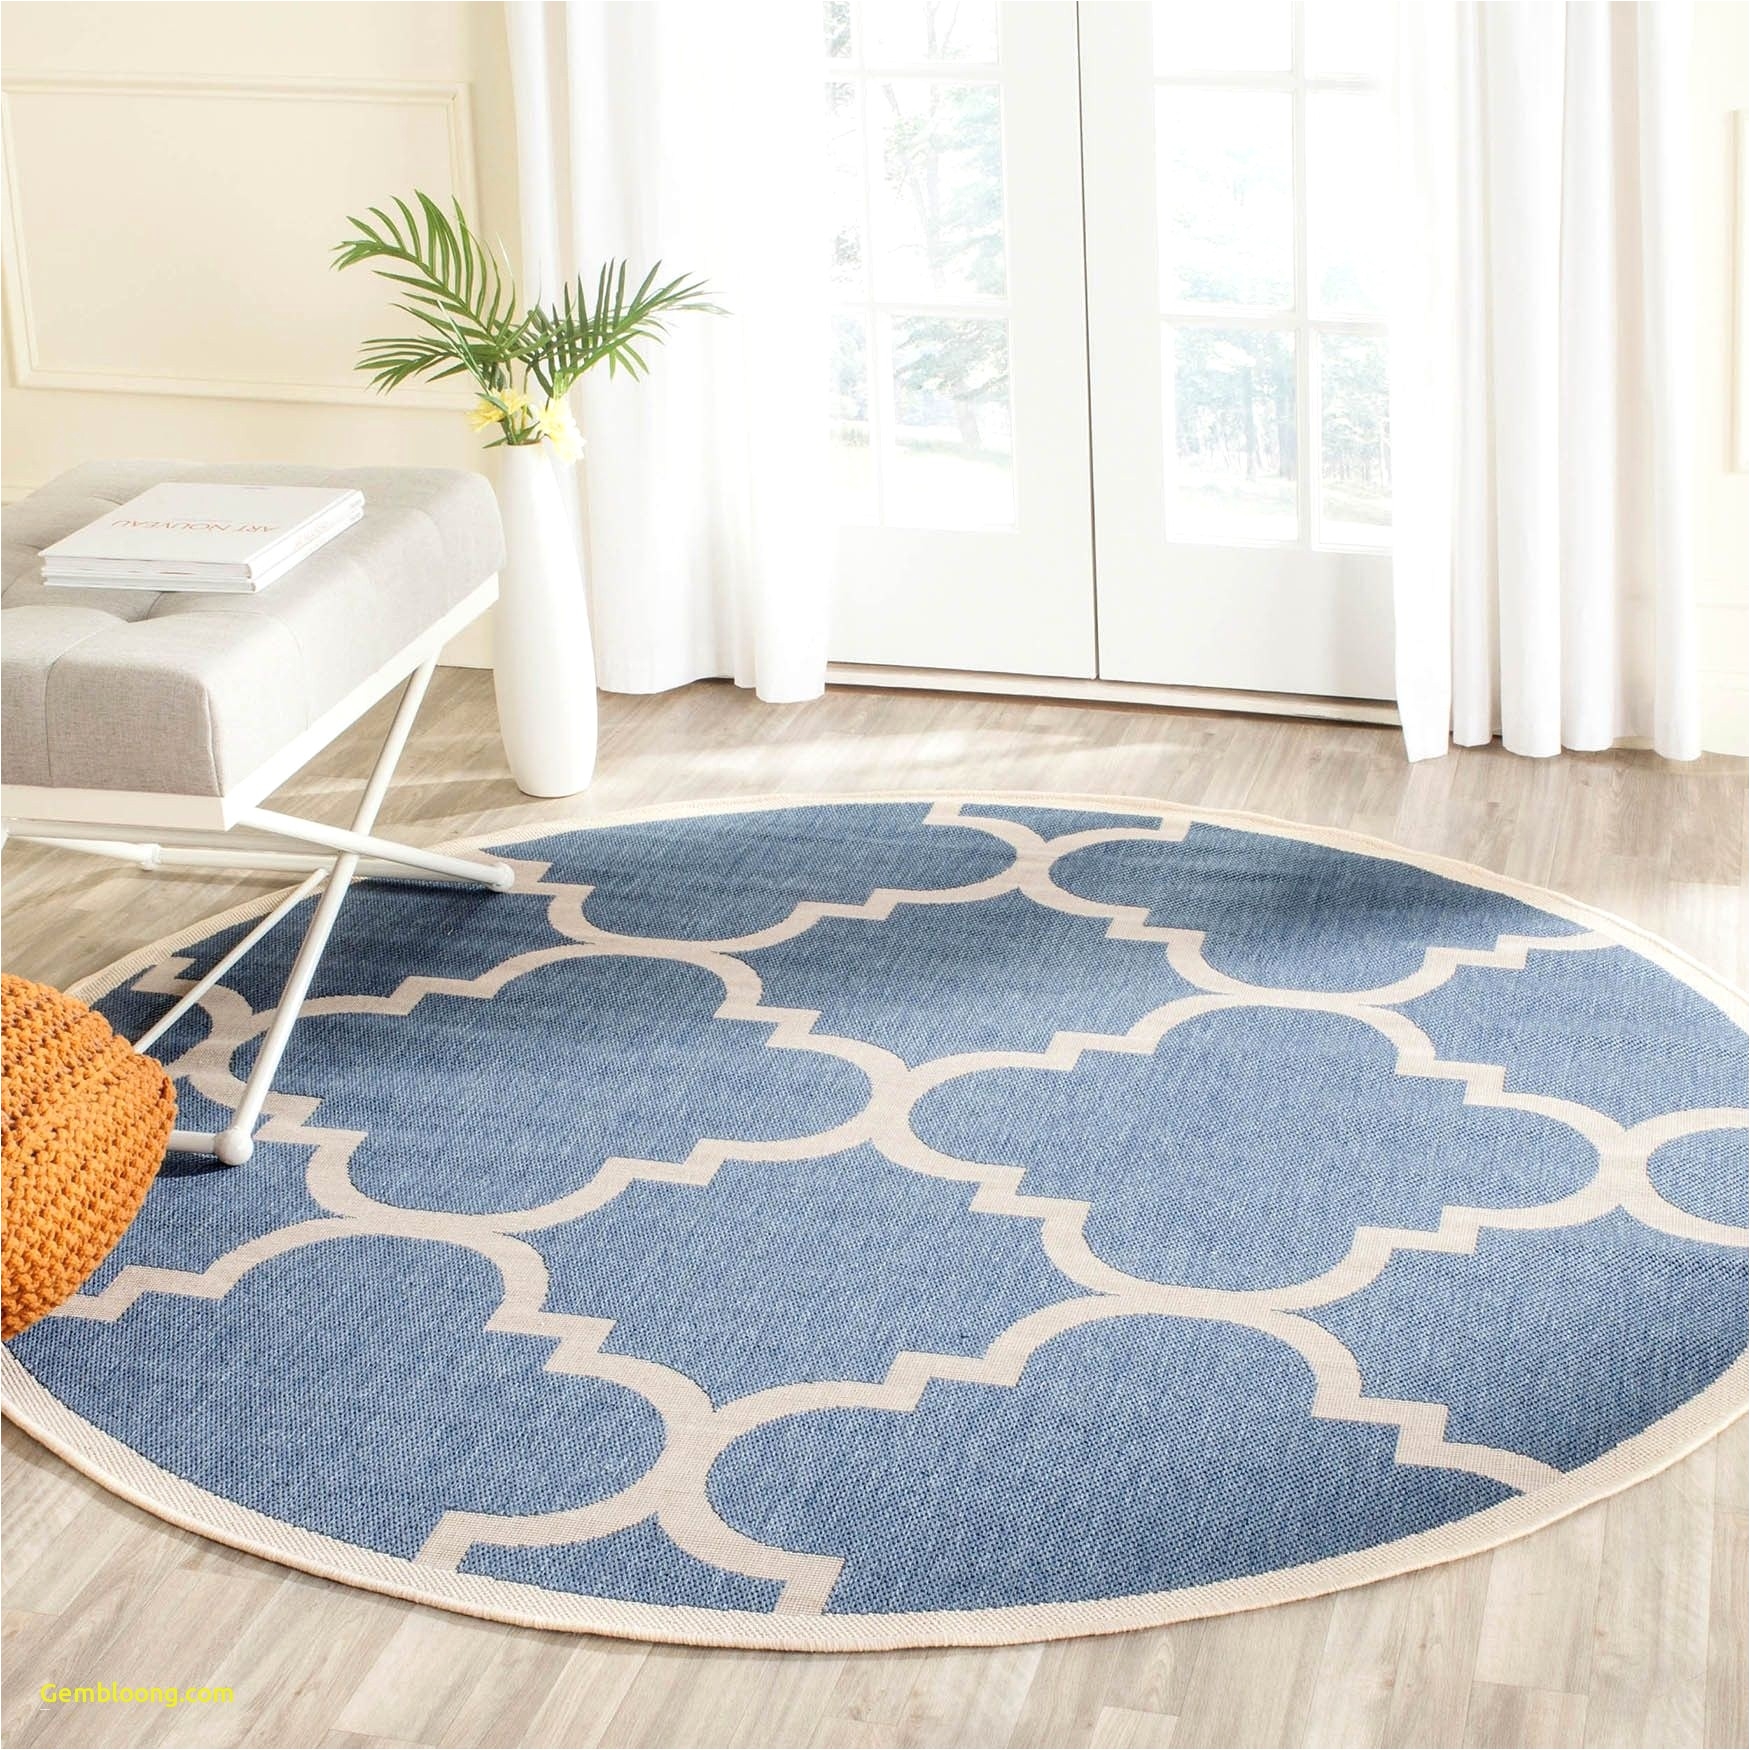 Colorful Rugs for Sale Home Design Outdoor Patio Rug Fresh Outdoor Rug Ideas New Patio